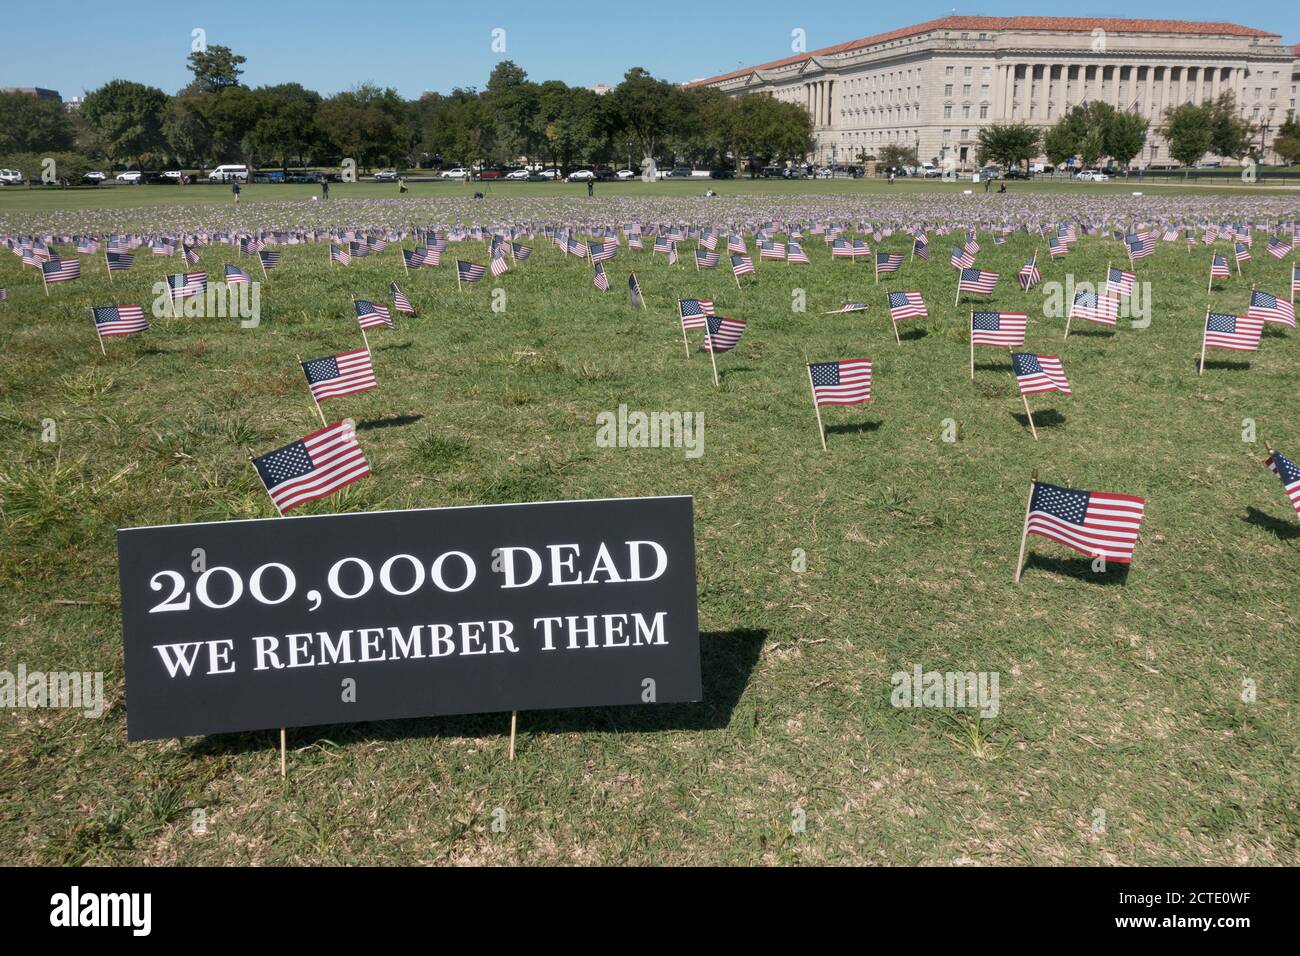 22 Sept. 2020: Some of the 20,000 American flags placed on the grounds of the Washington Monument, representing the 200,000 deaths due to Covid-19, a threshold just passed.  The flags were placed by the COVID Memorial Project, a local Washington, DC group. Stock Photo